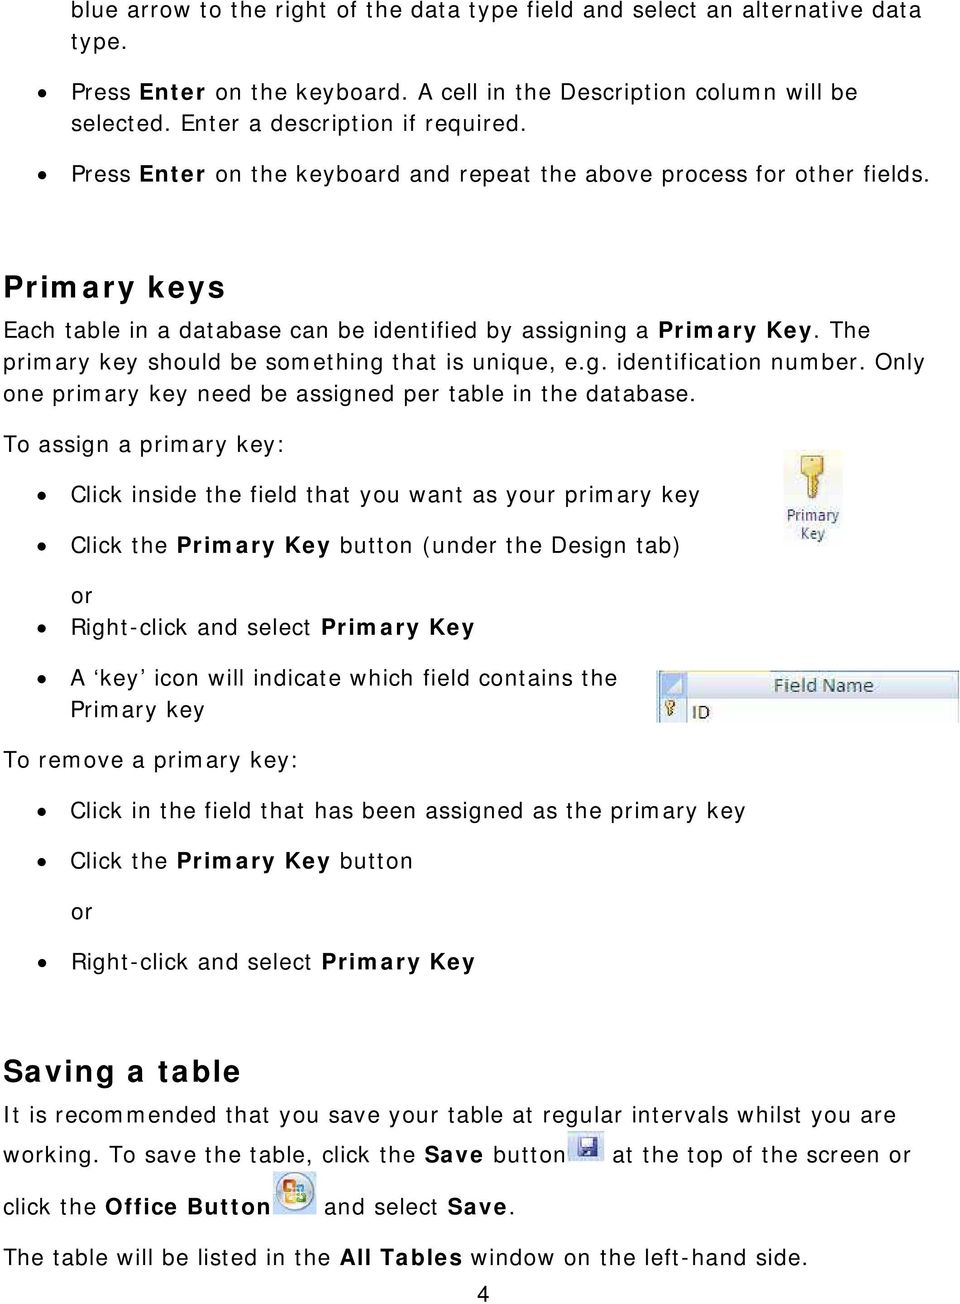 The primary key should be something that is unique, e.g. identification number. Only one primary key need be assigned per table in the database.